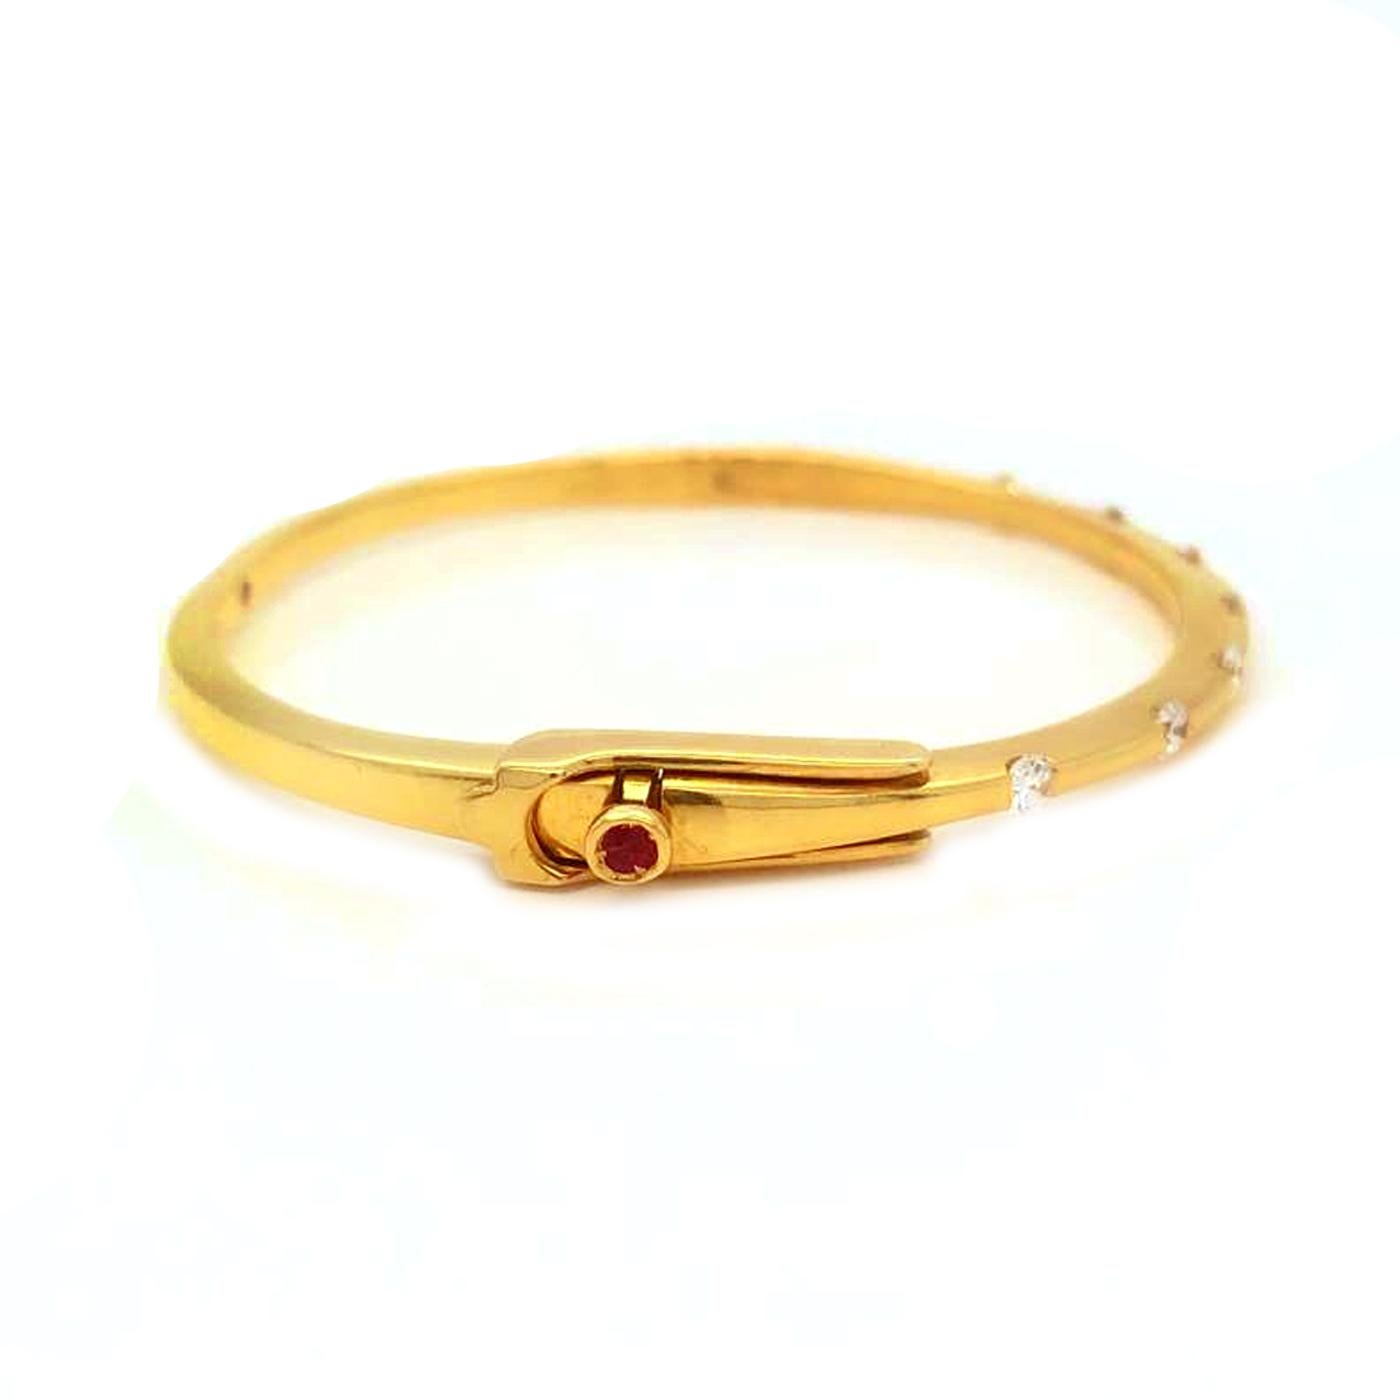 An 18K yellow gold lady's hinged bangle bracelet, Roberto Coin Classica Parisienne collection, having 0.50ct diamonds, and signature is hidden ruby accents inside bracelet and on clasp button, 0.3 Carrat.

About:
Gold: 18-Karat Yellow Gold.
Grams: